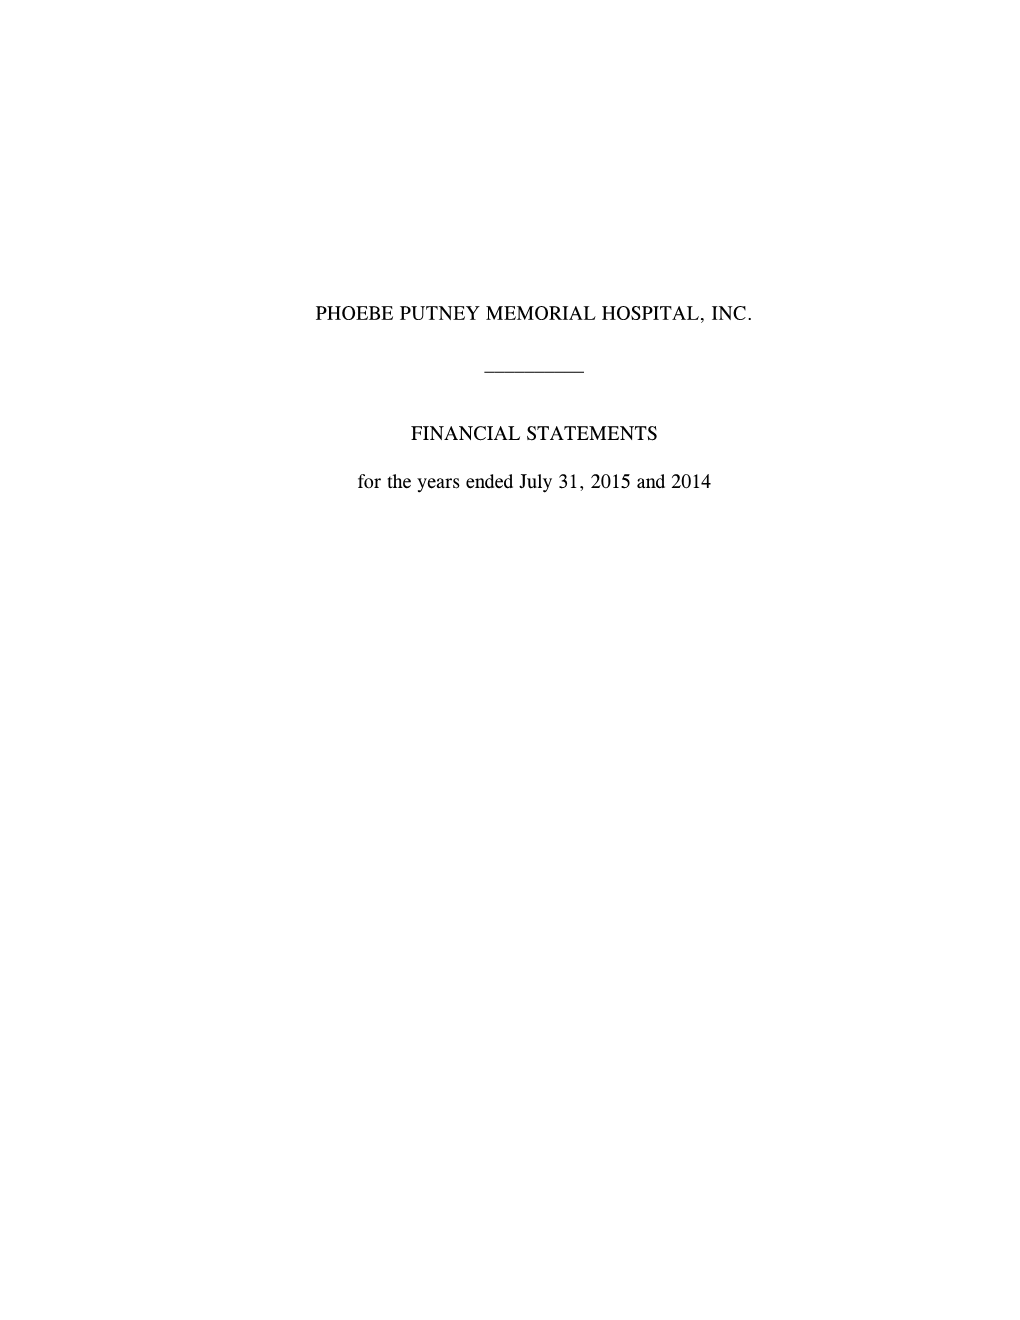 PPMH Audited Financial Report – 2015 and 2014